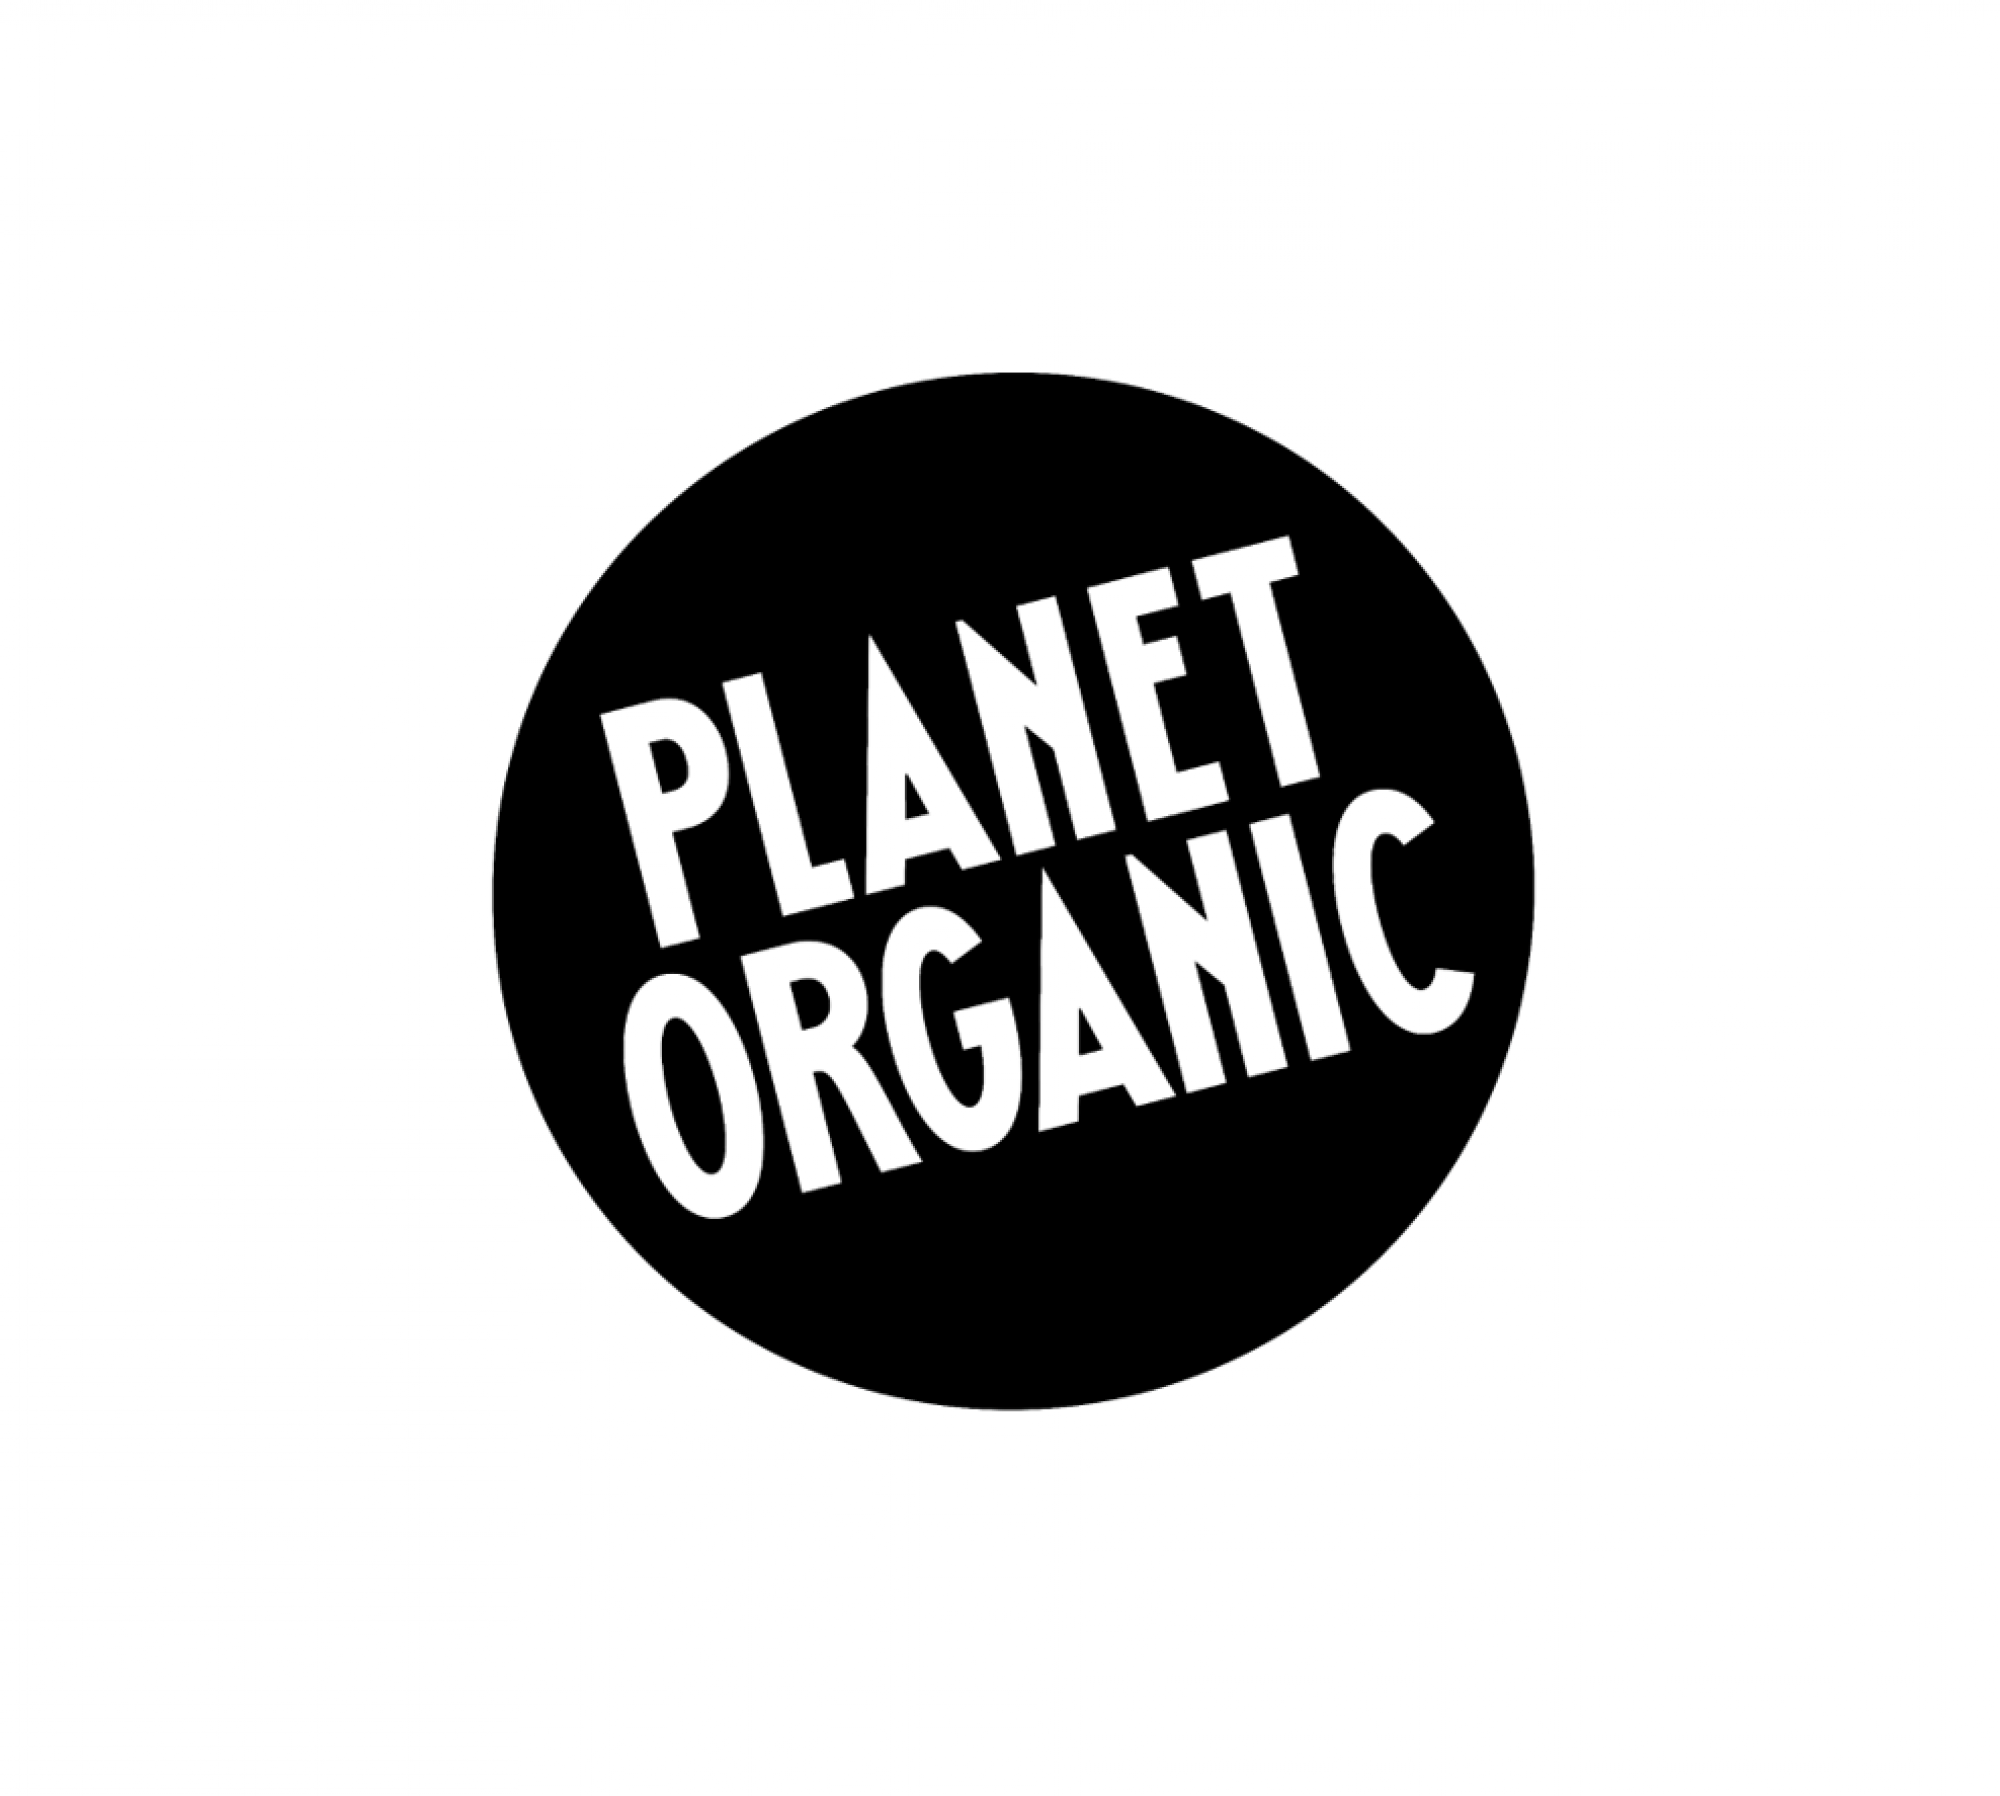 New Client! Welcoming Planet Organic